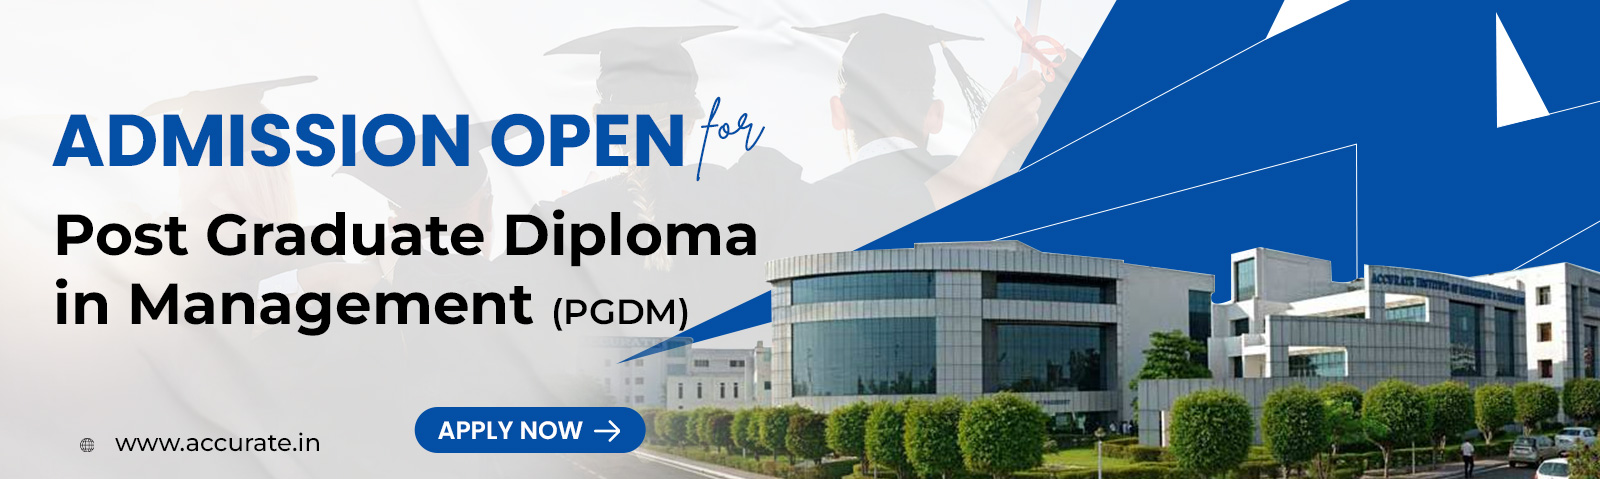 Apply Now Admission open